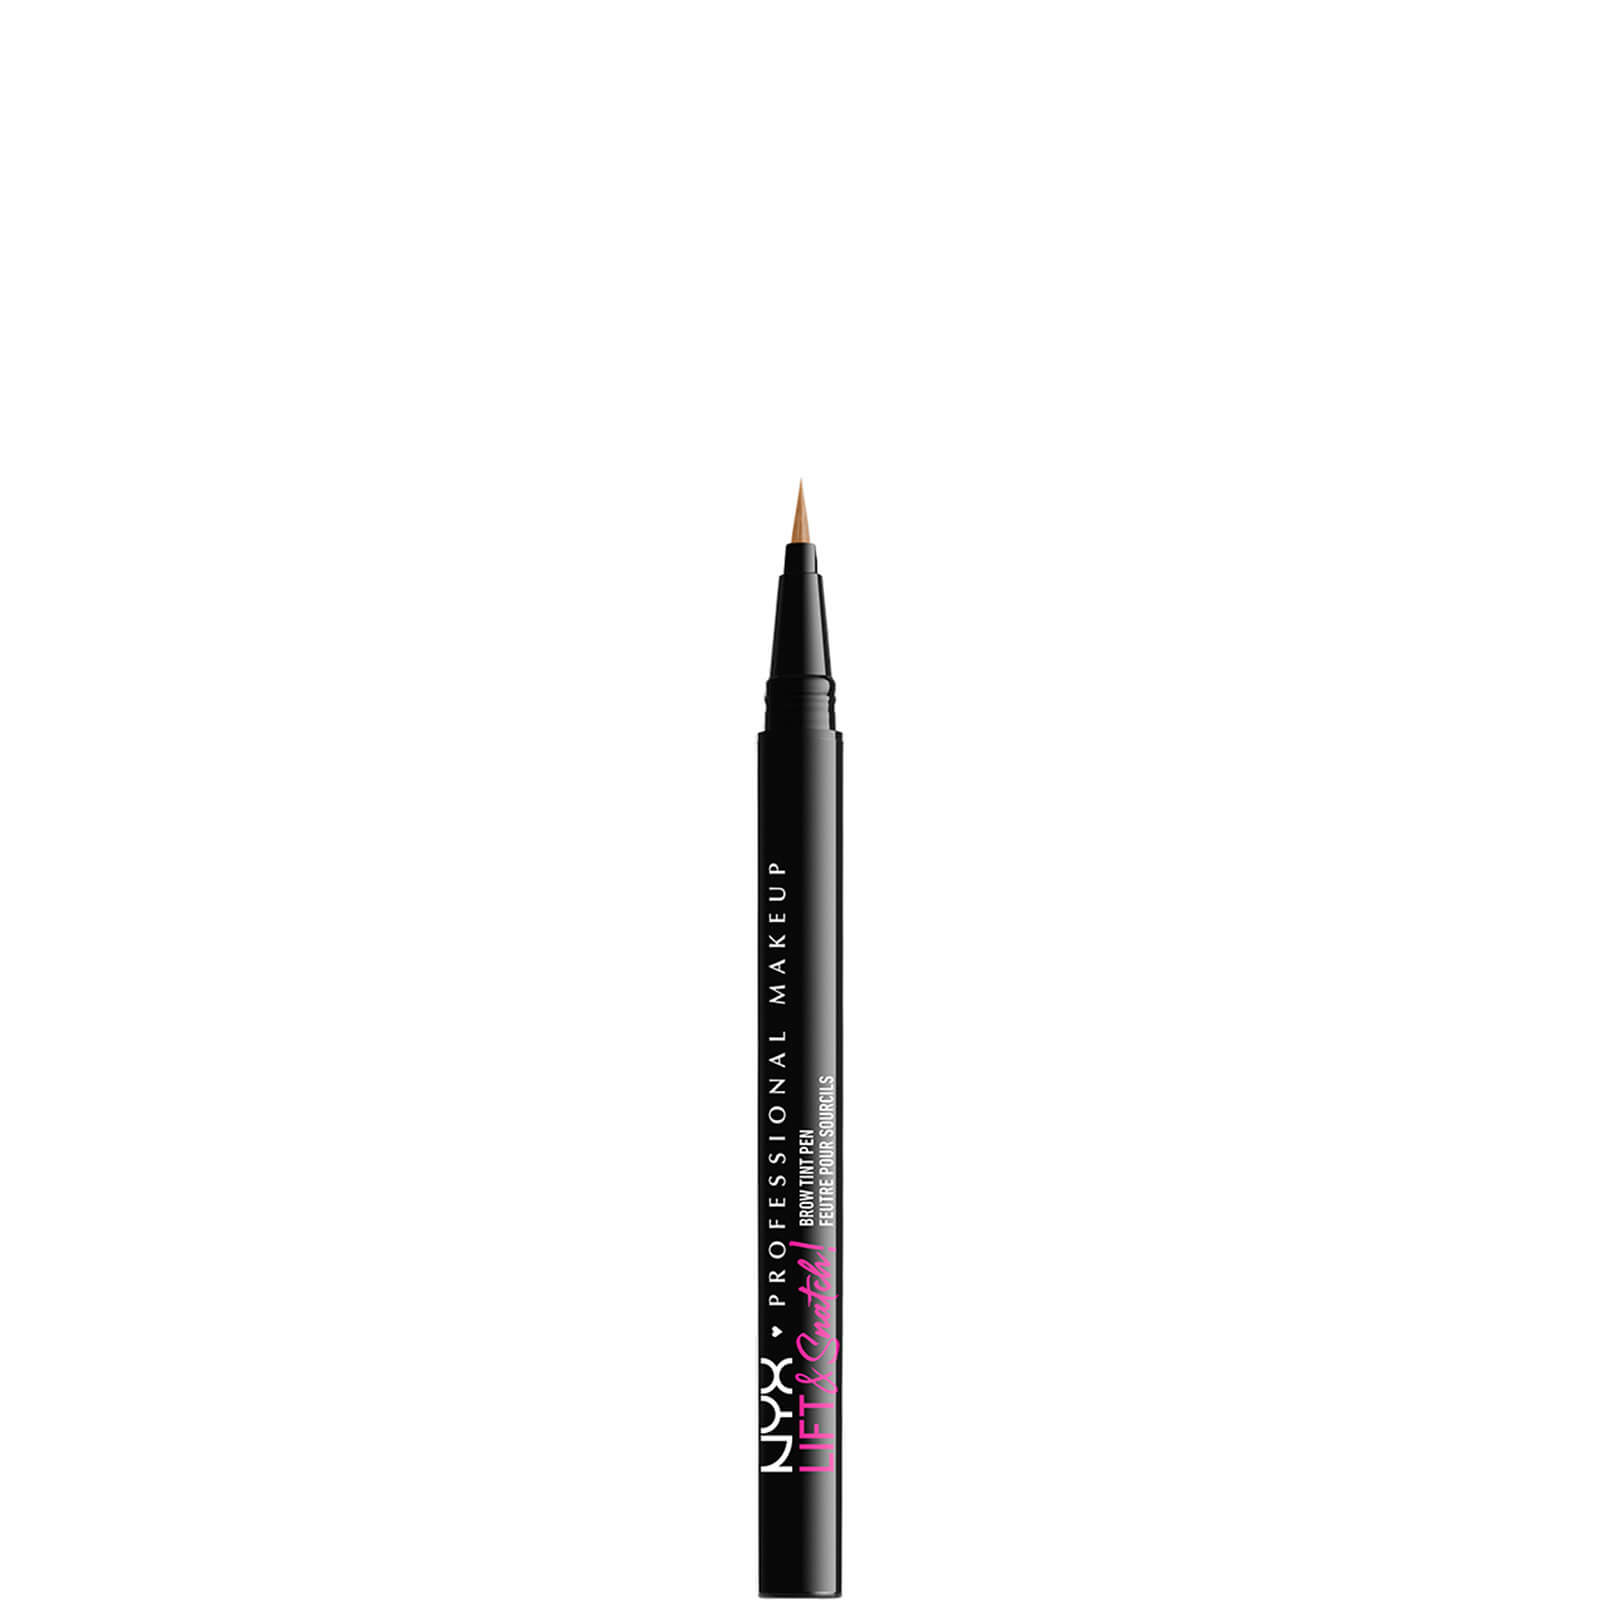 NYX Professional Makeup Lift and Snatch Brow Tint Pen 3g (Various Shades) - Brown von NYX Professional Makeup